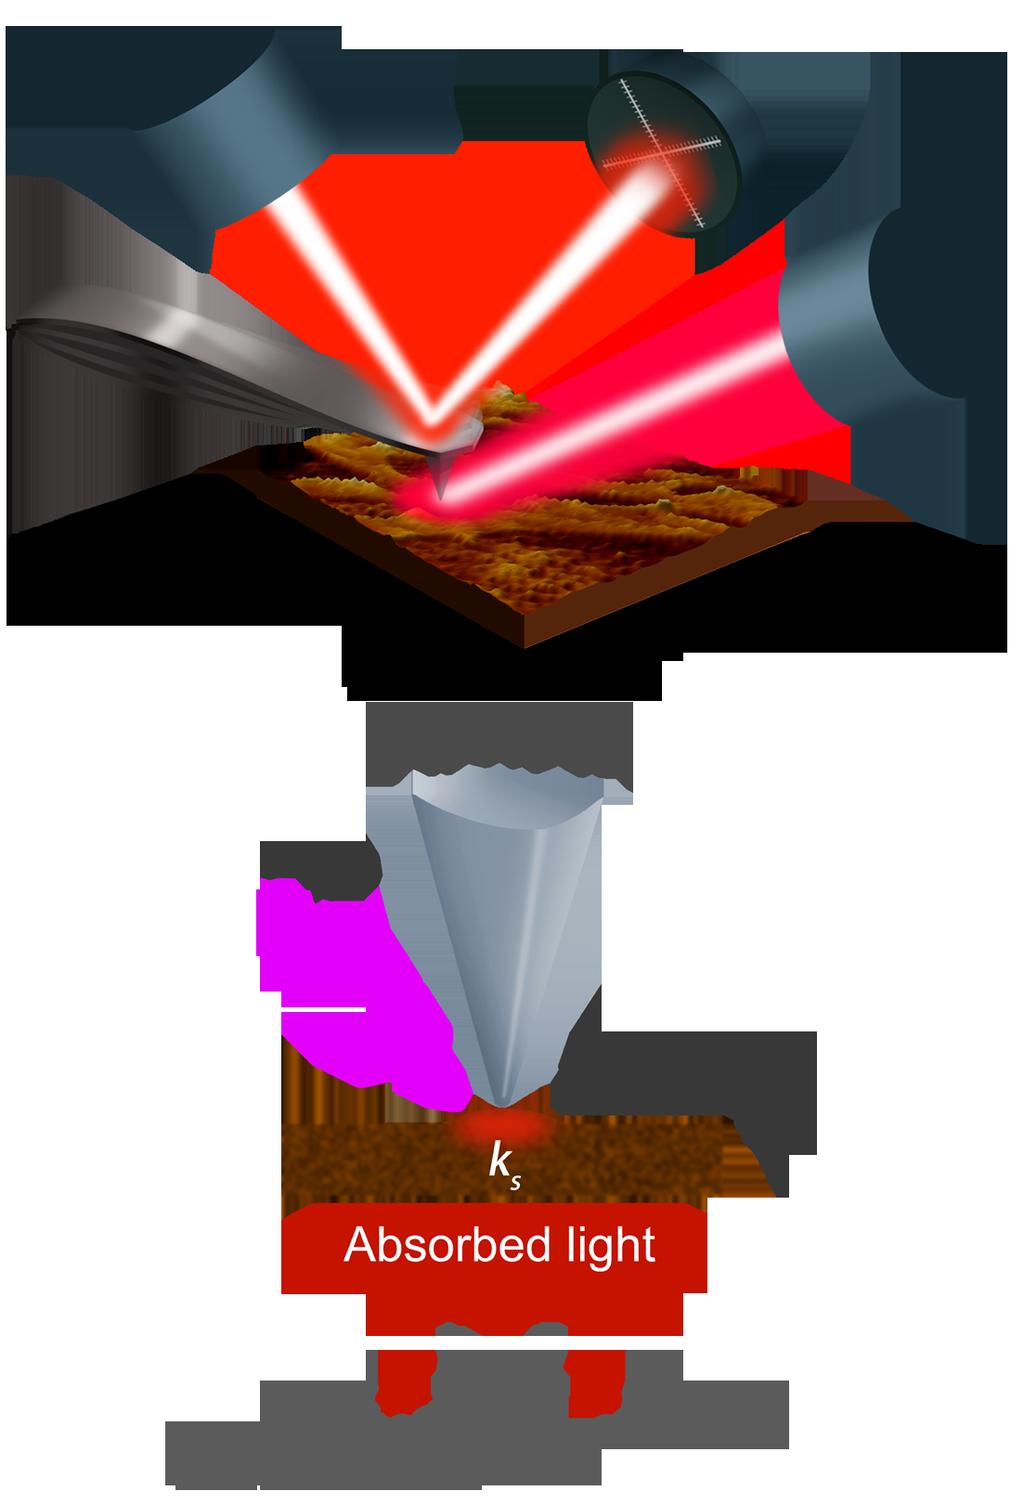 AFM-IR technique Infrared (IR) spectroscopy is one of the most recognized analytical measurement techniques in academic, government, and industrial R&D and failure analysis laboratories for the